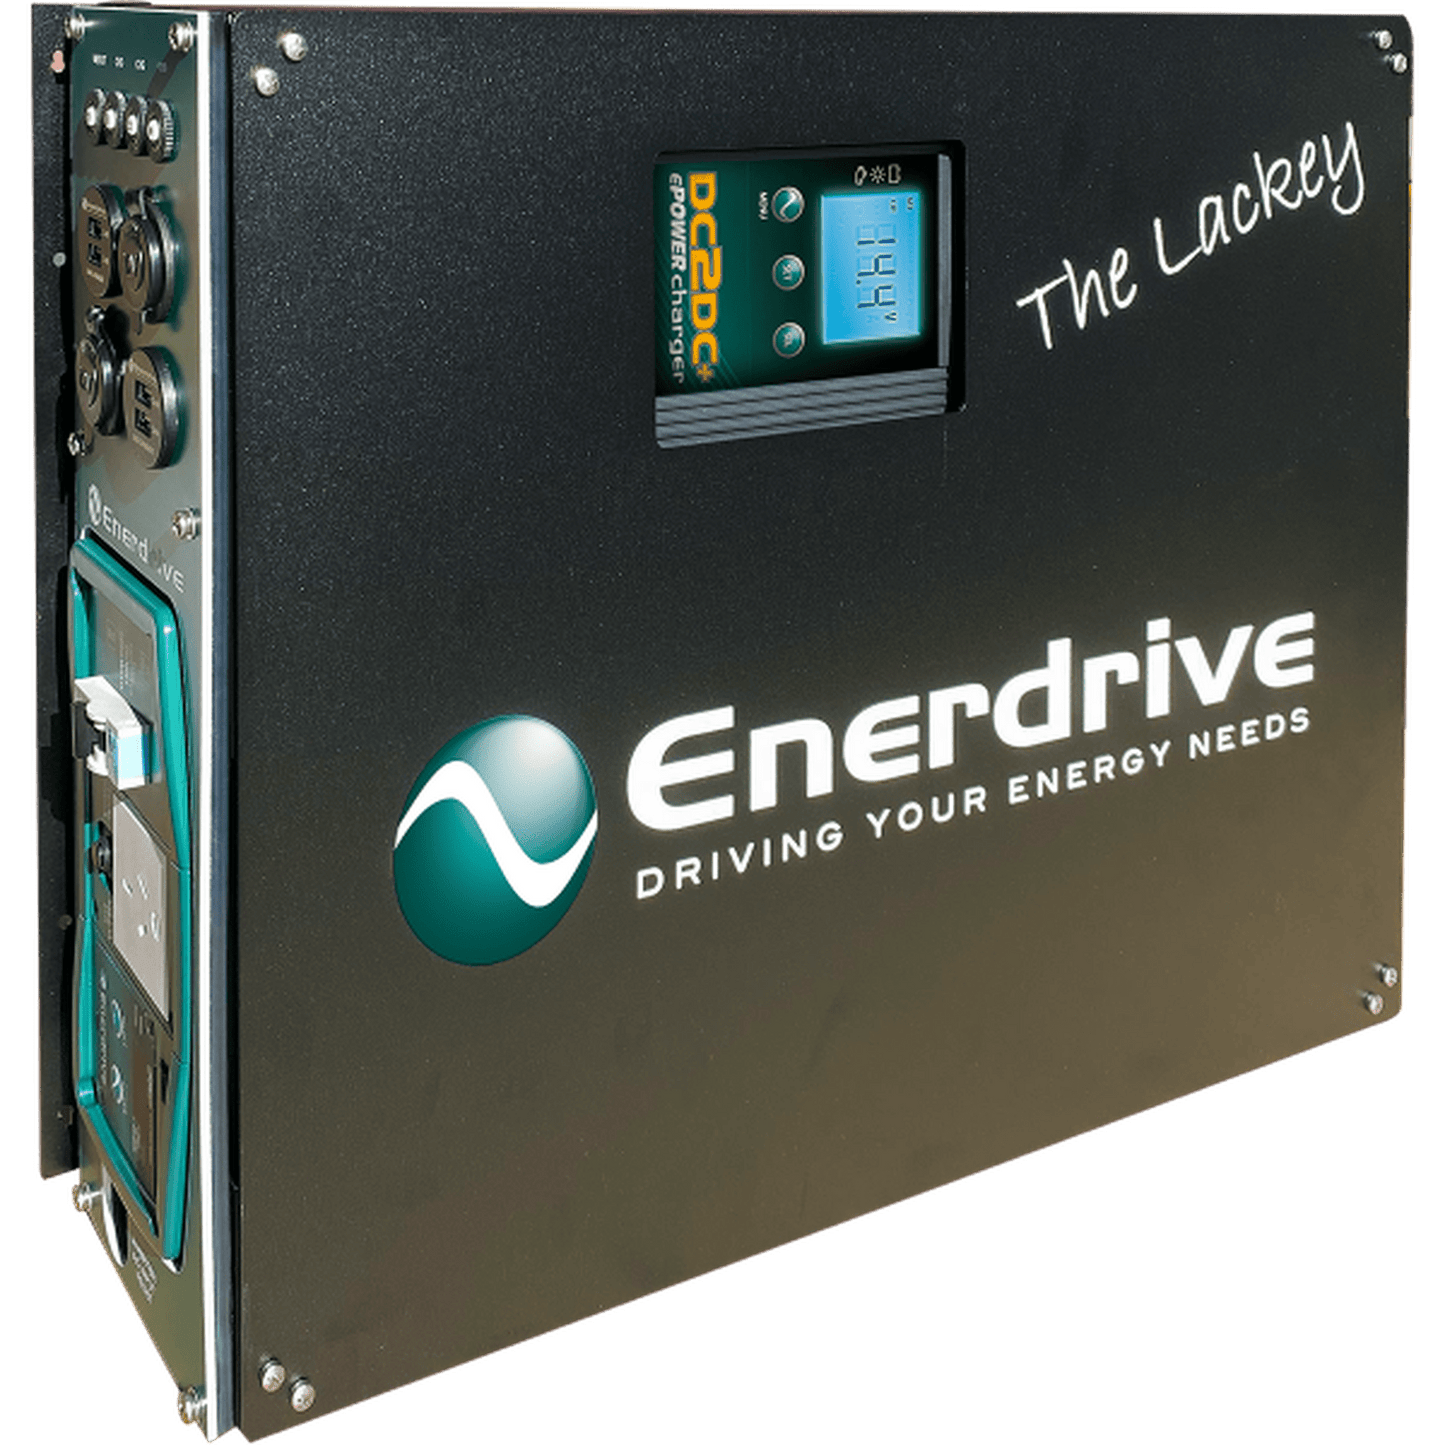 Enerdrive 2000W "The Lackey" Tradie Power System